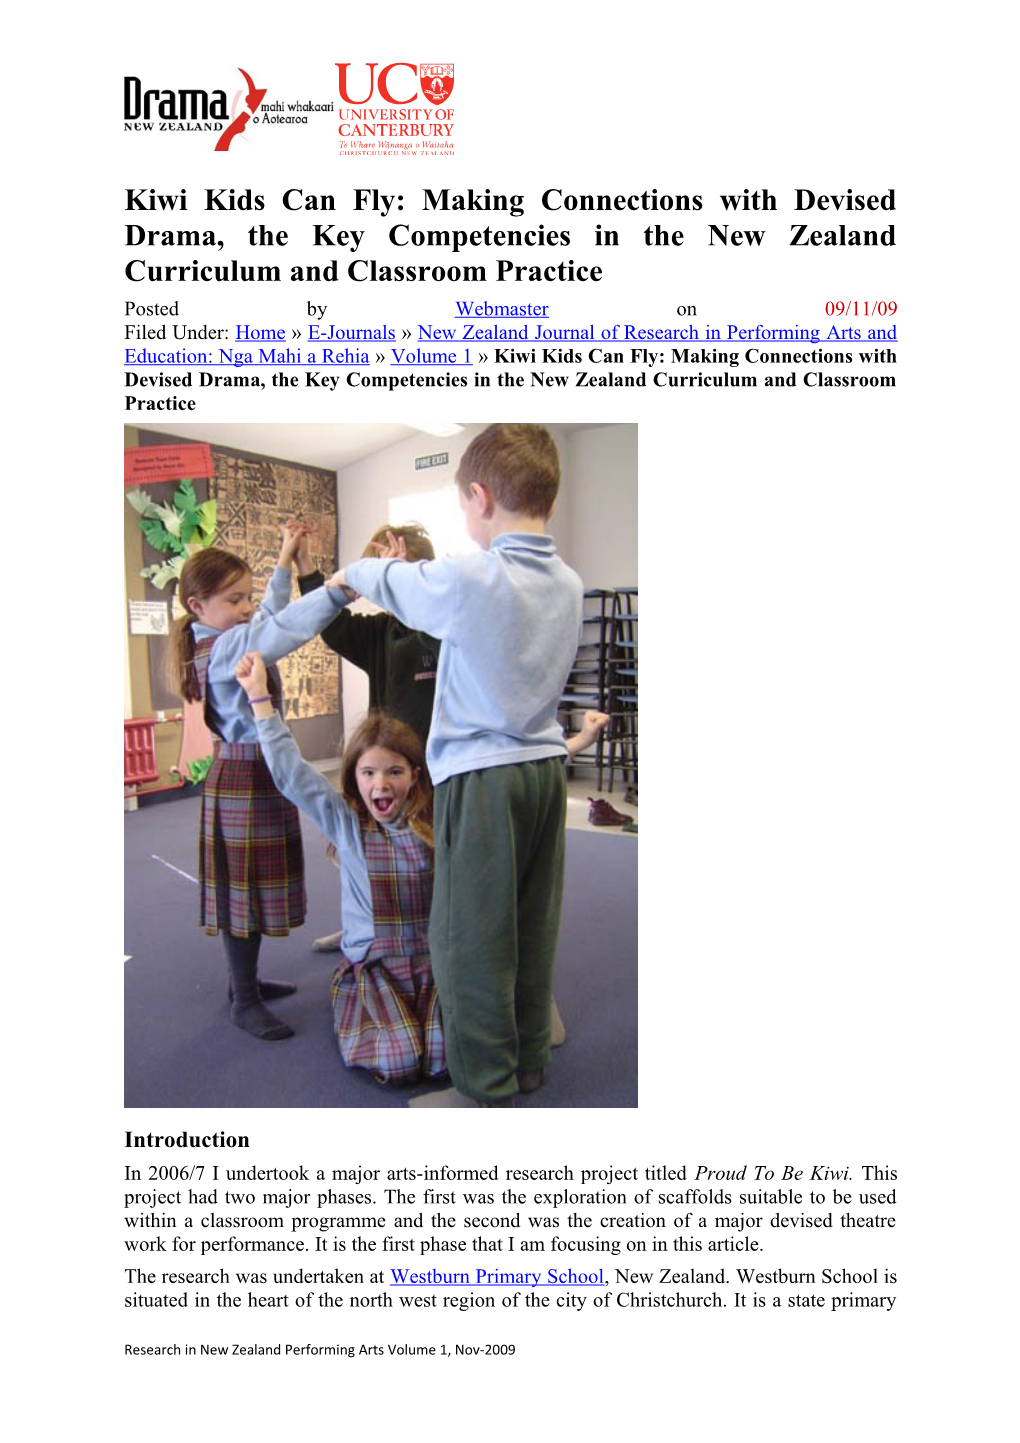 Kiwi Kids Can Fly: Making Connections with Devised Drama, the Key Competencies in The